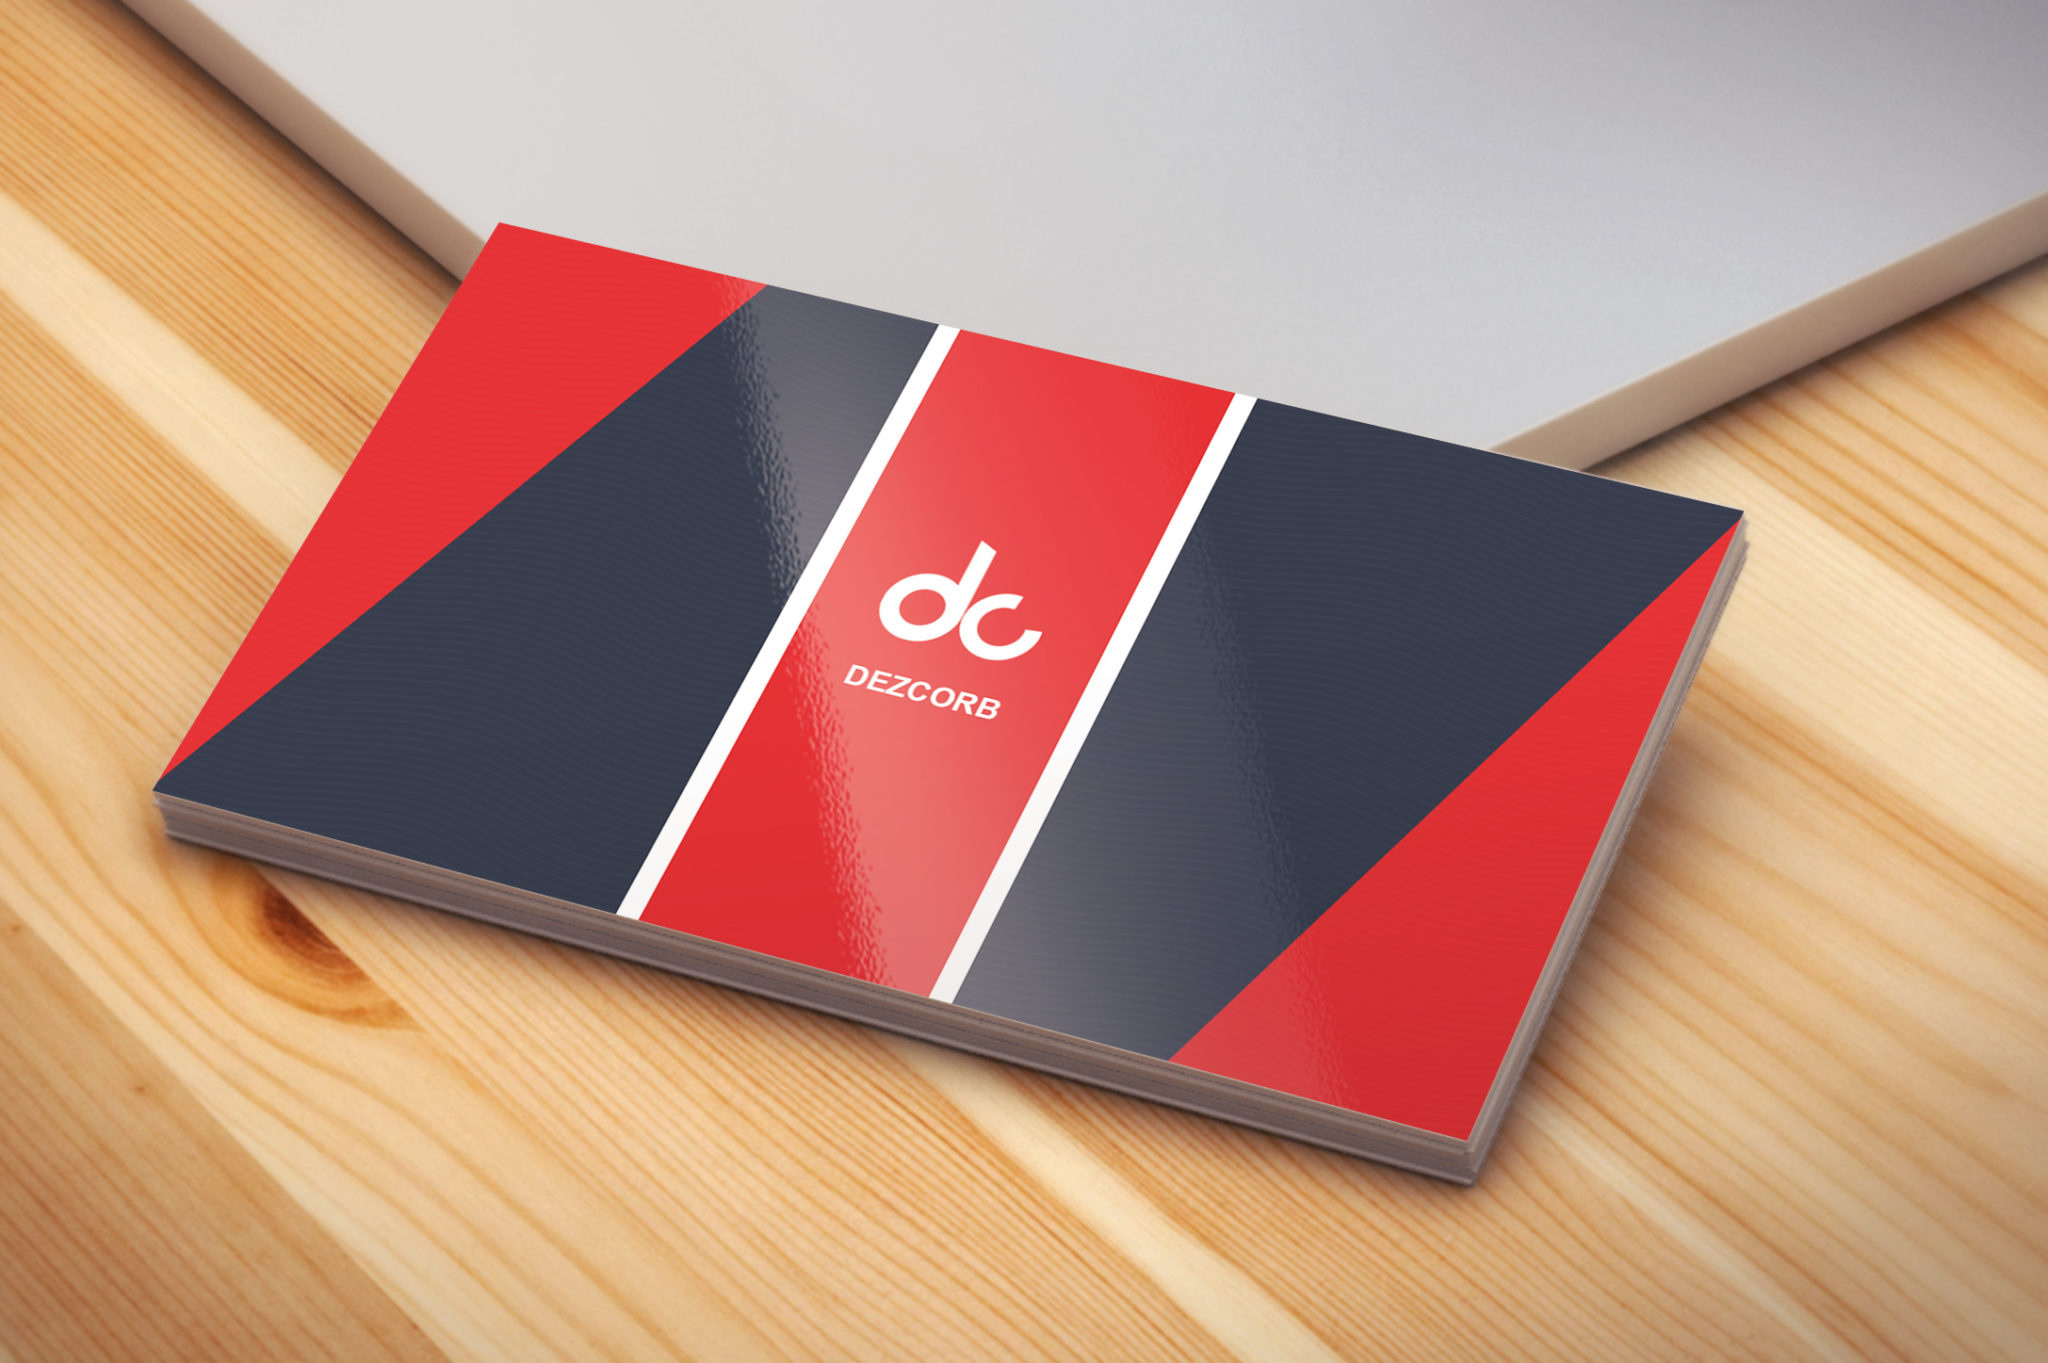 1 How To Design A Business Card In Photoshop Cs6 Dezcorb Within Photoshop Cs6 Business Card Template